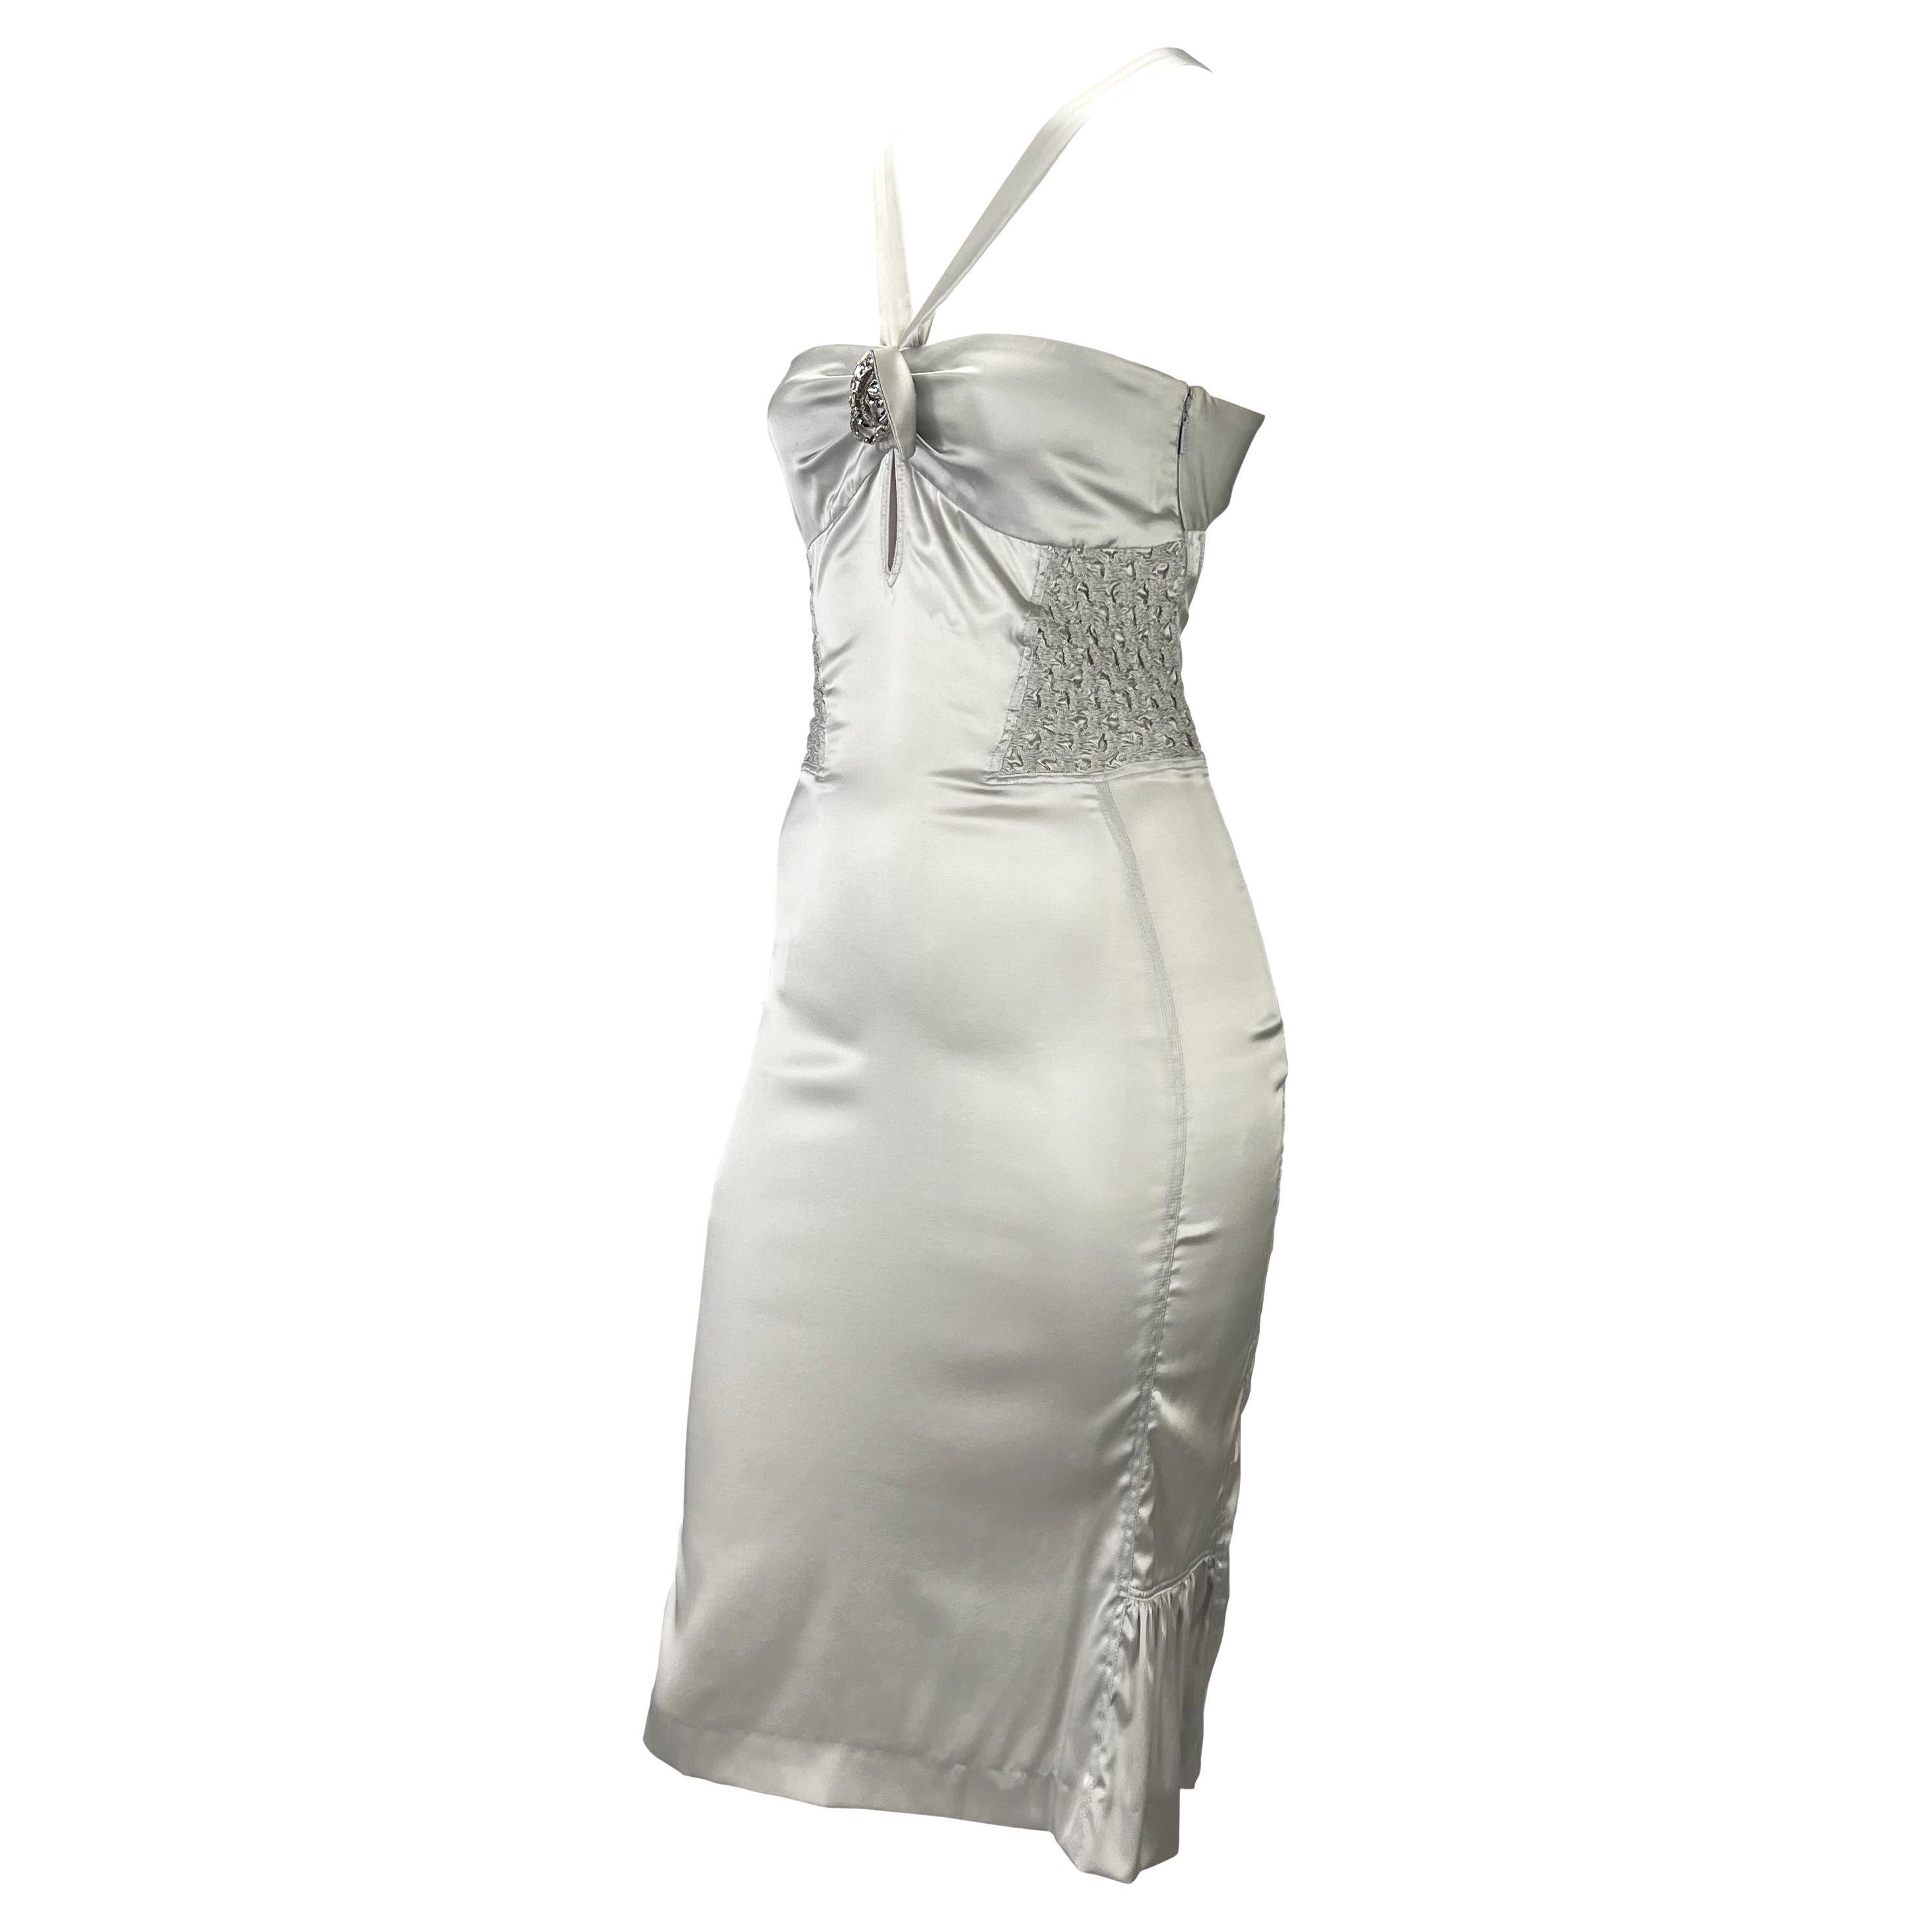 Presenting a beautiful silver silk ruched Gucci dress, designed by Tom Ford. From the Spring/Summer 2004 collection, this form-fitting dress features a Grecian-like neckline, keyhole cutout below the bust, and an exposed back. Ruched details add